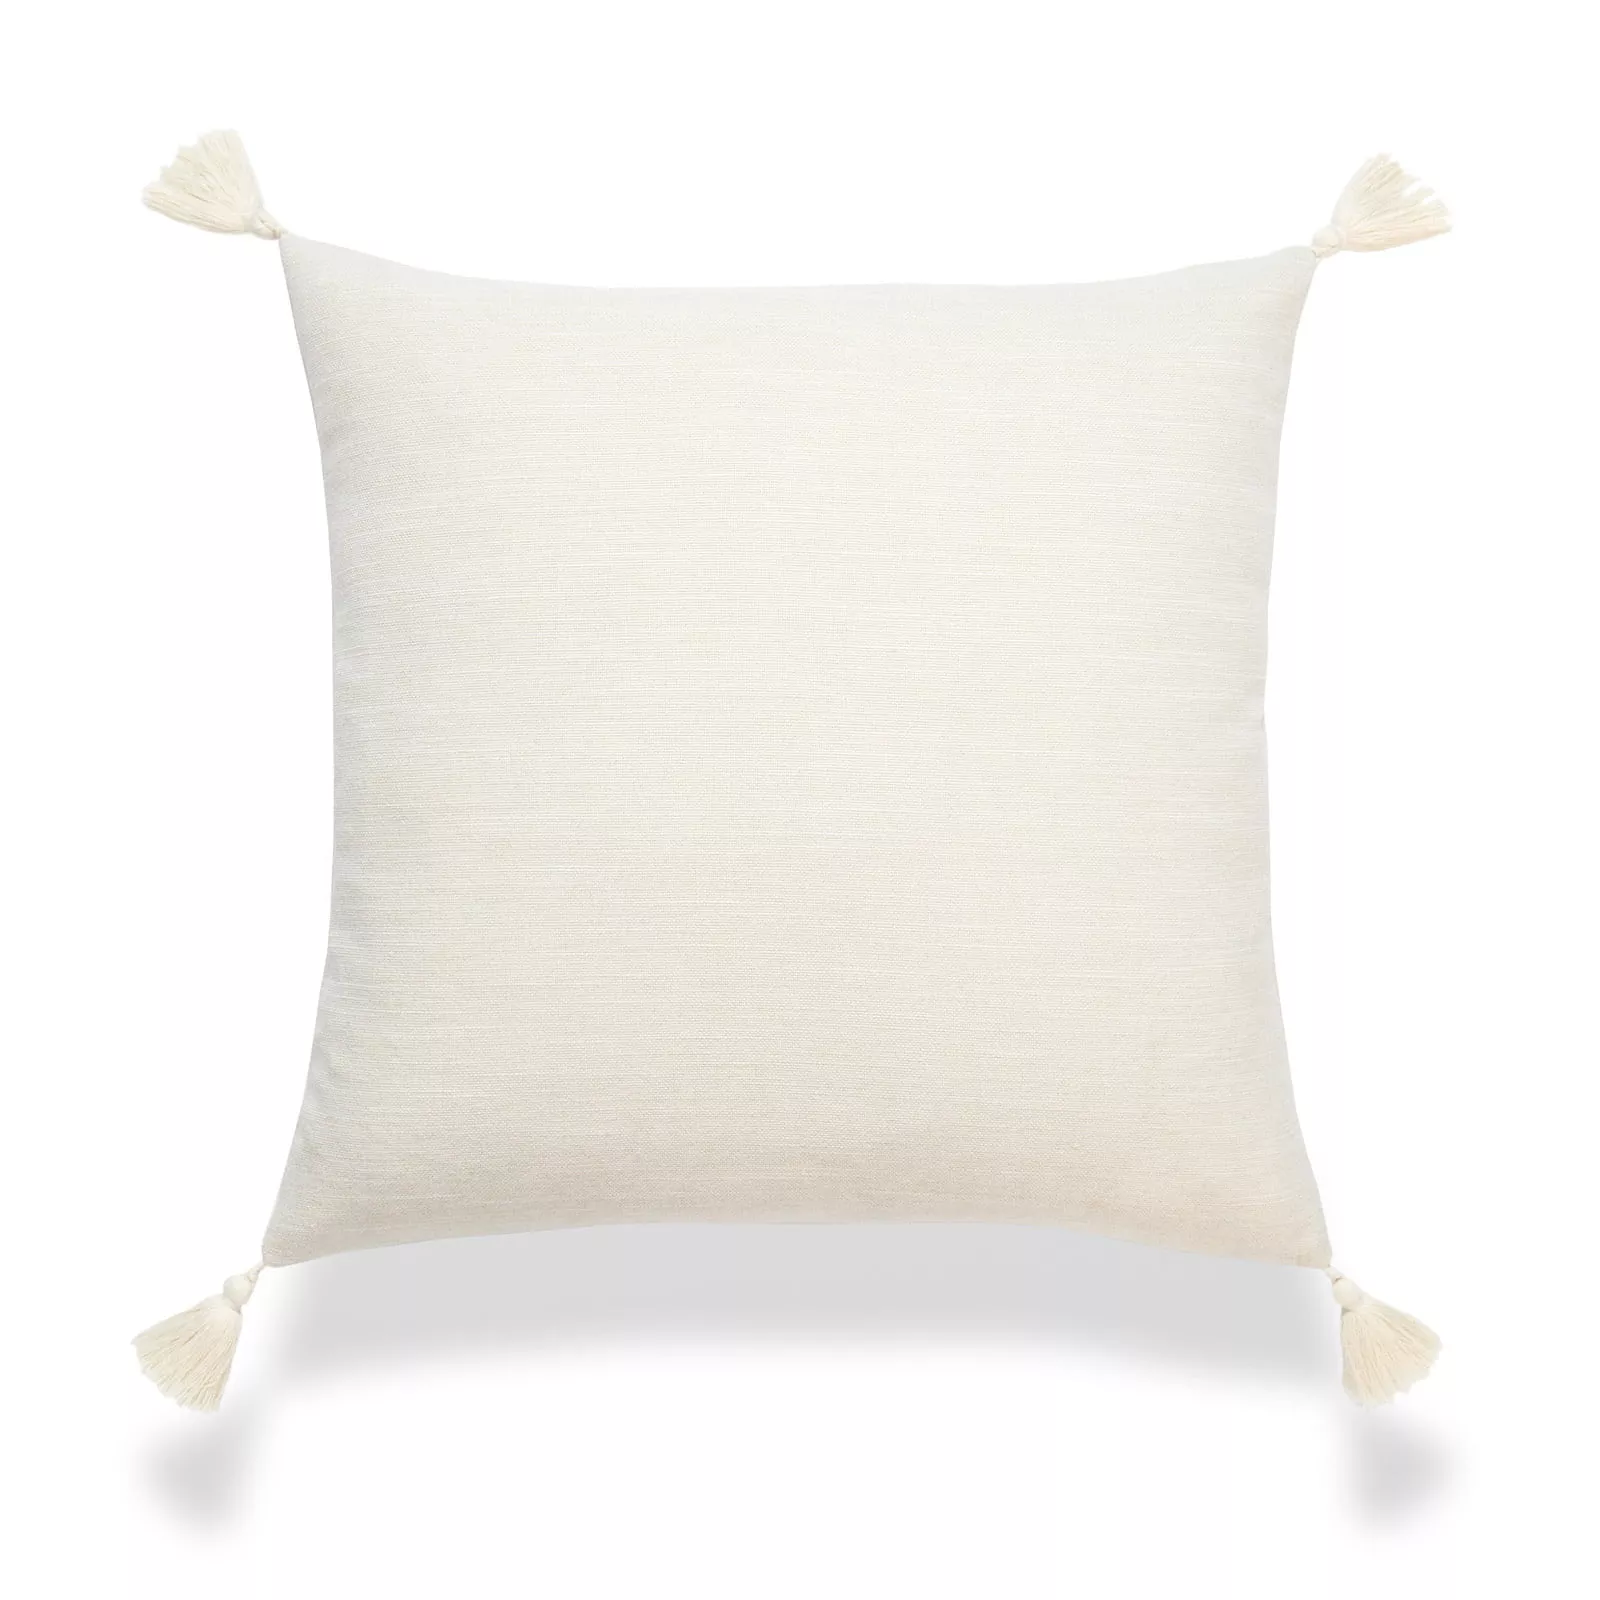 Hofdeco Mid Century Neutral Decorative Pillow Cover Only, Beige Solid, 20x20